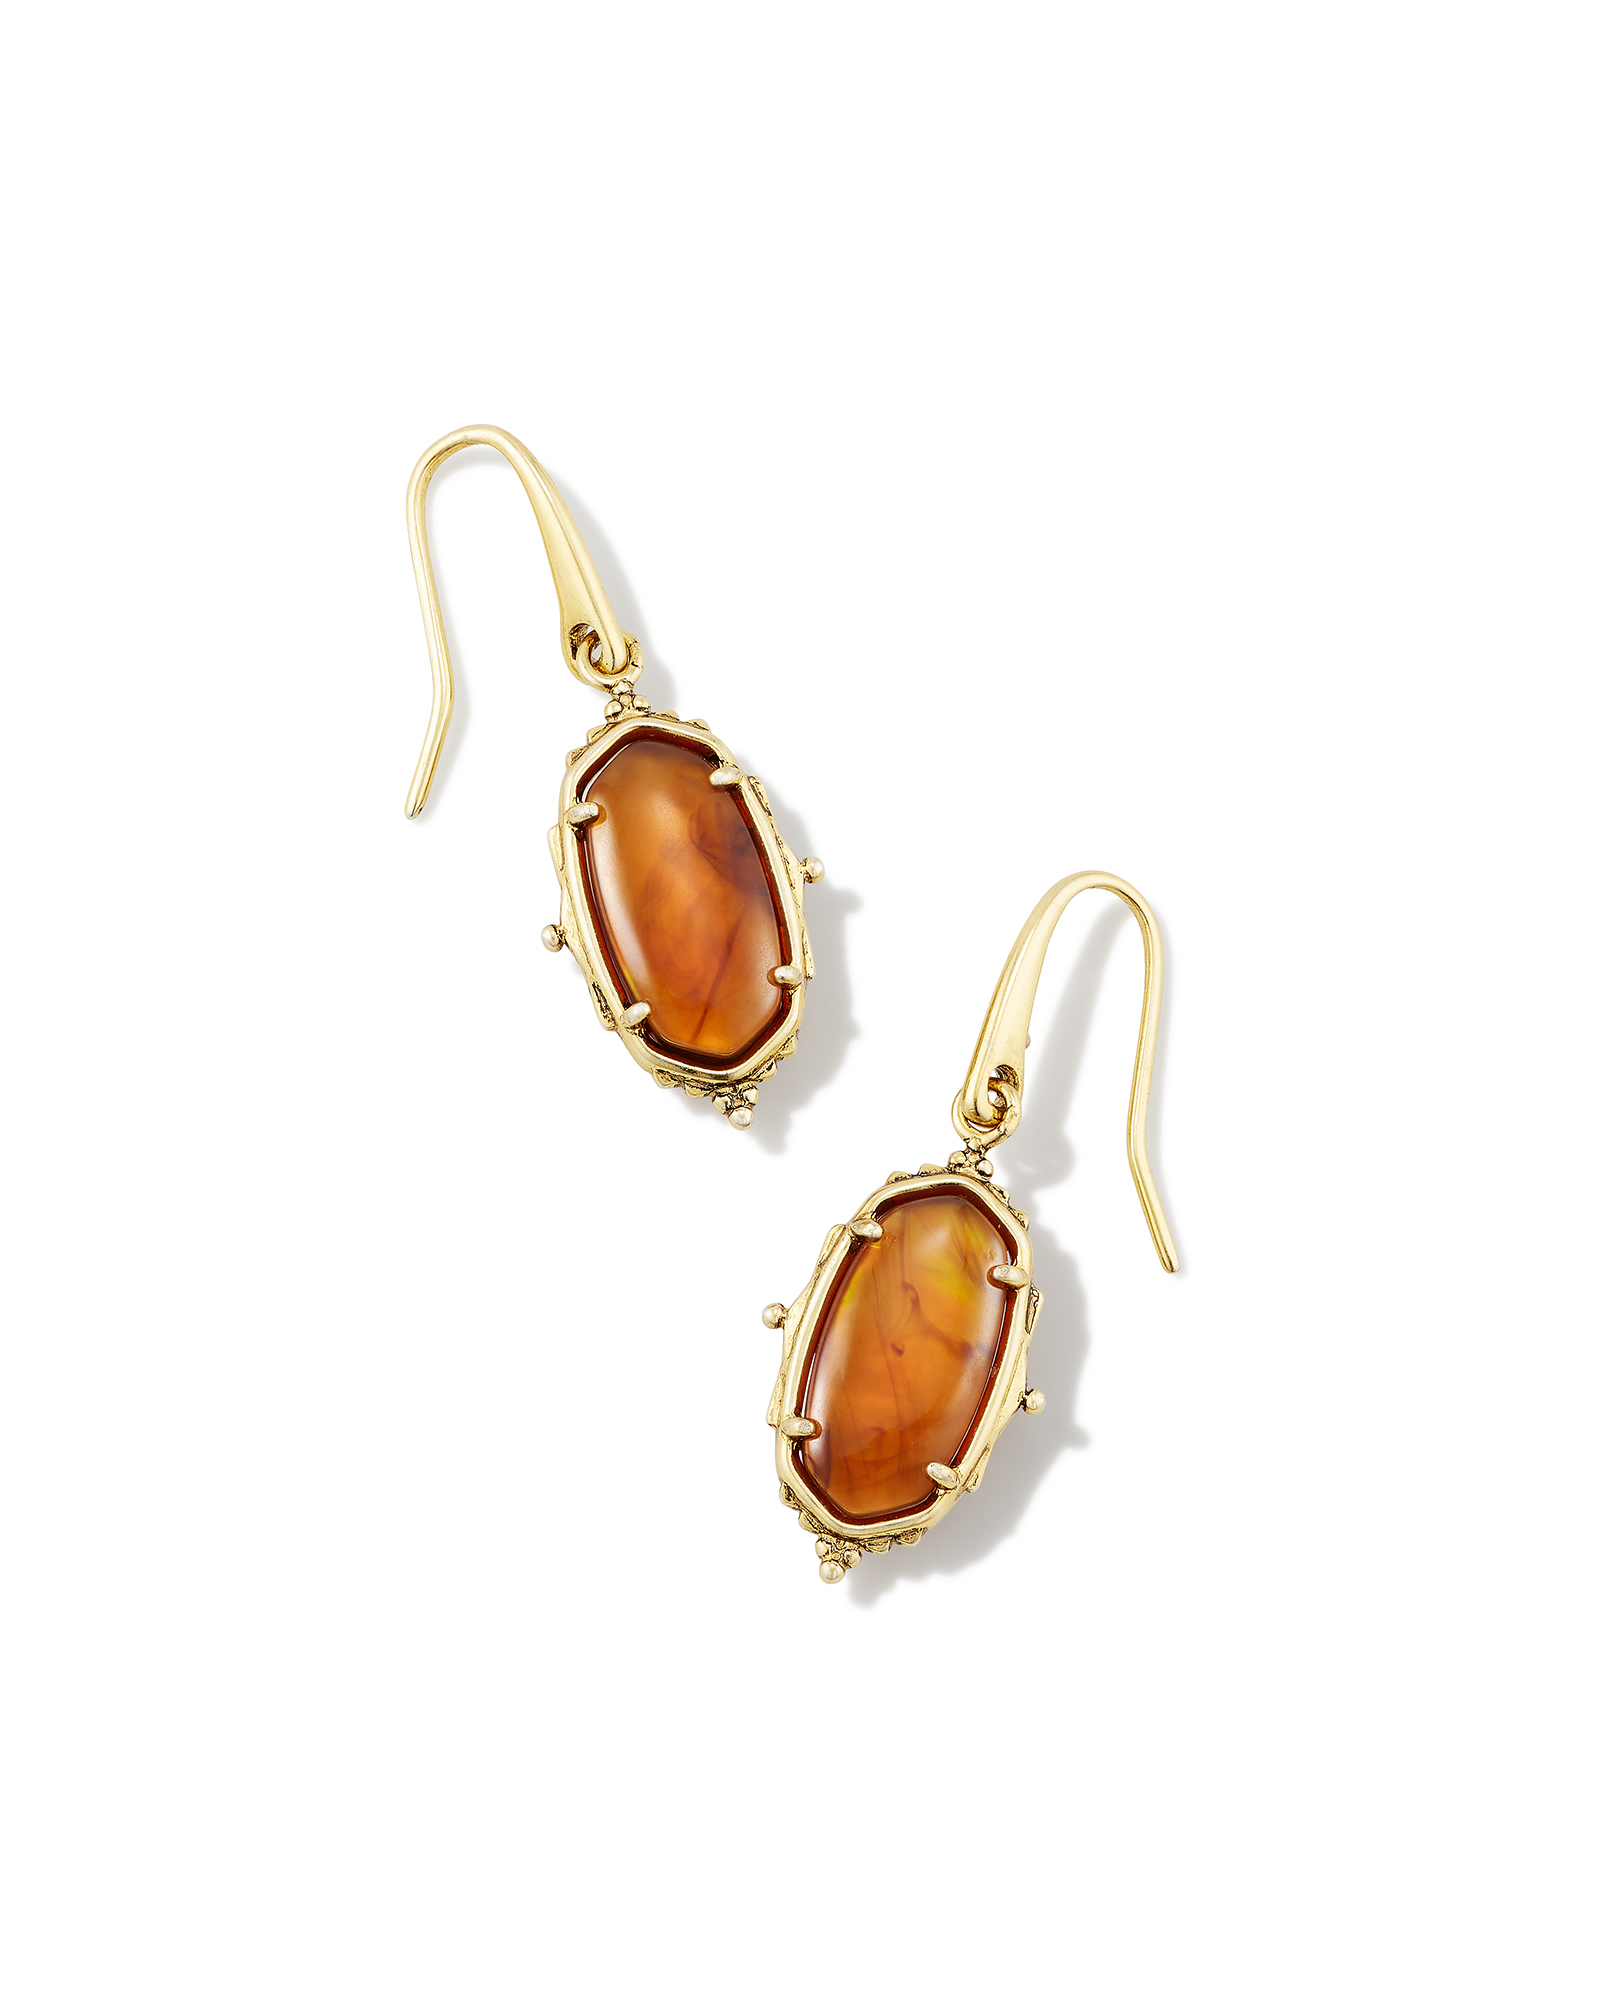 Baroque Vintage Gold Lee Drop Earrings in Marbled Amber Illusion ...